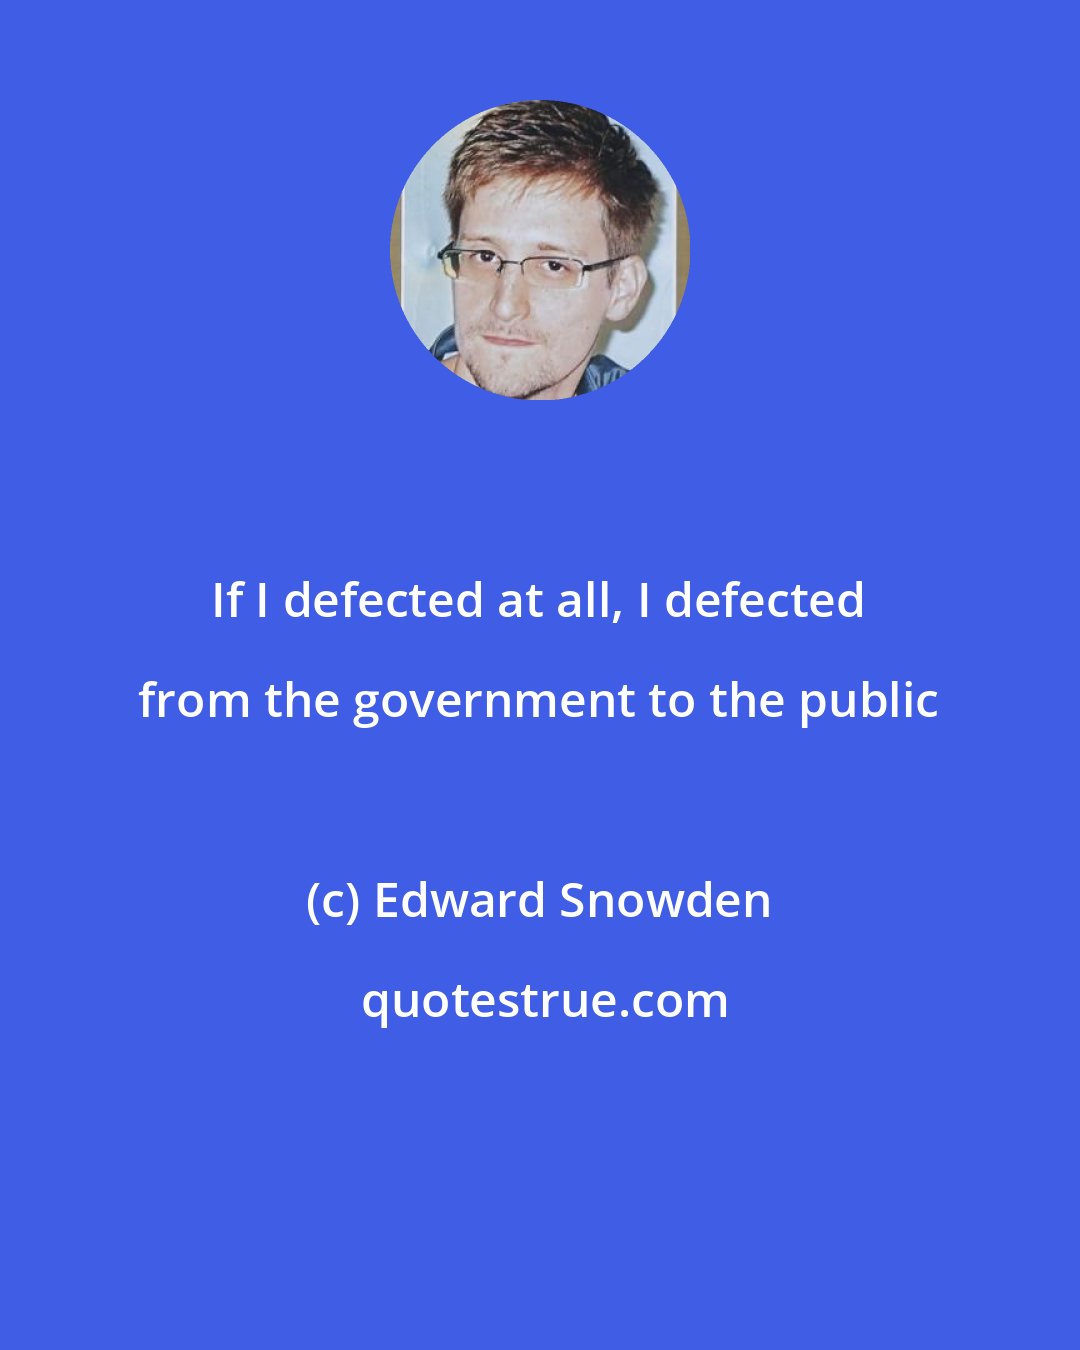 Edward Snowden: If I defected at all, I defected from the government to the public